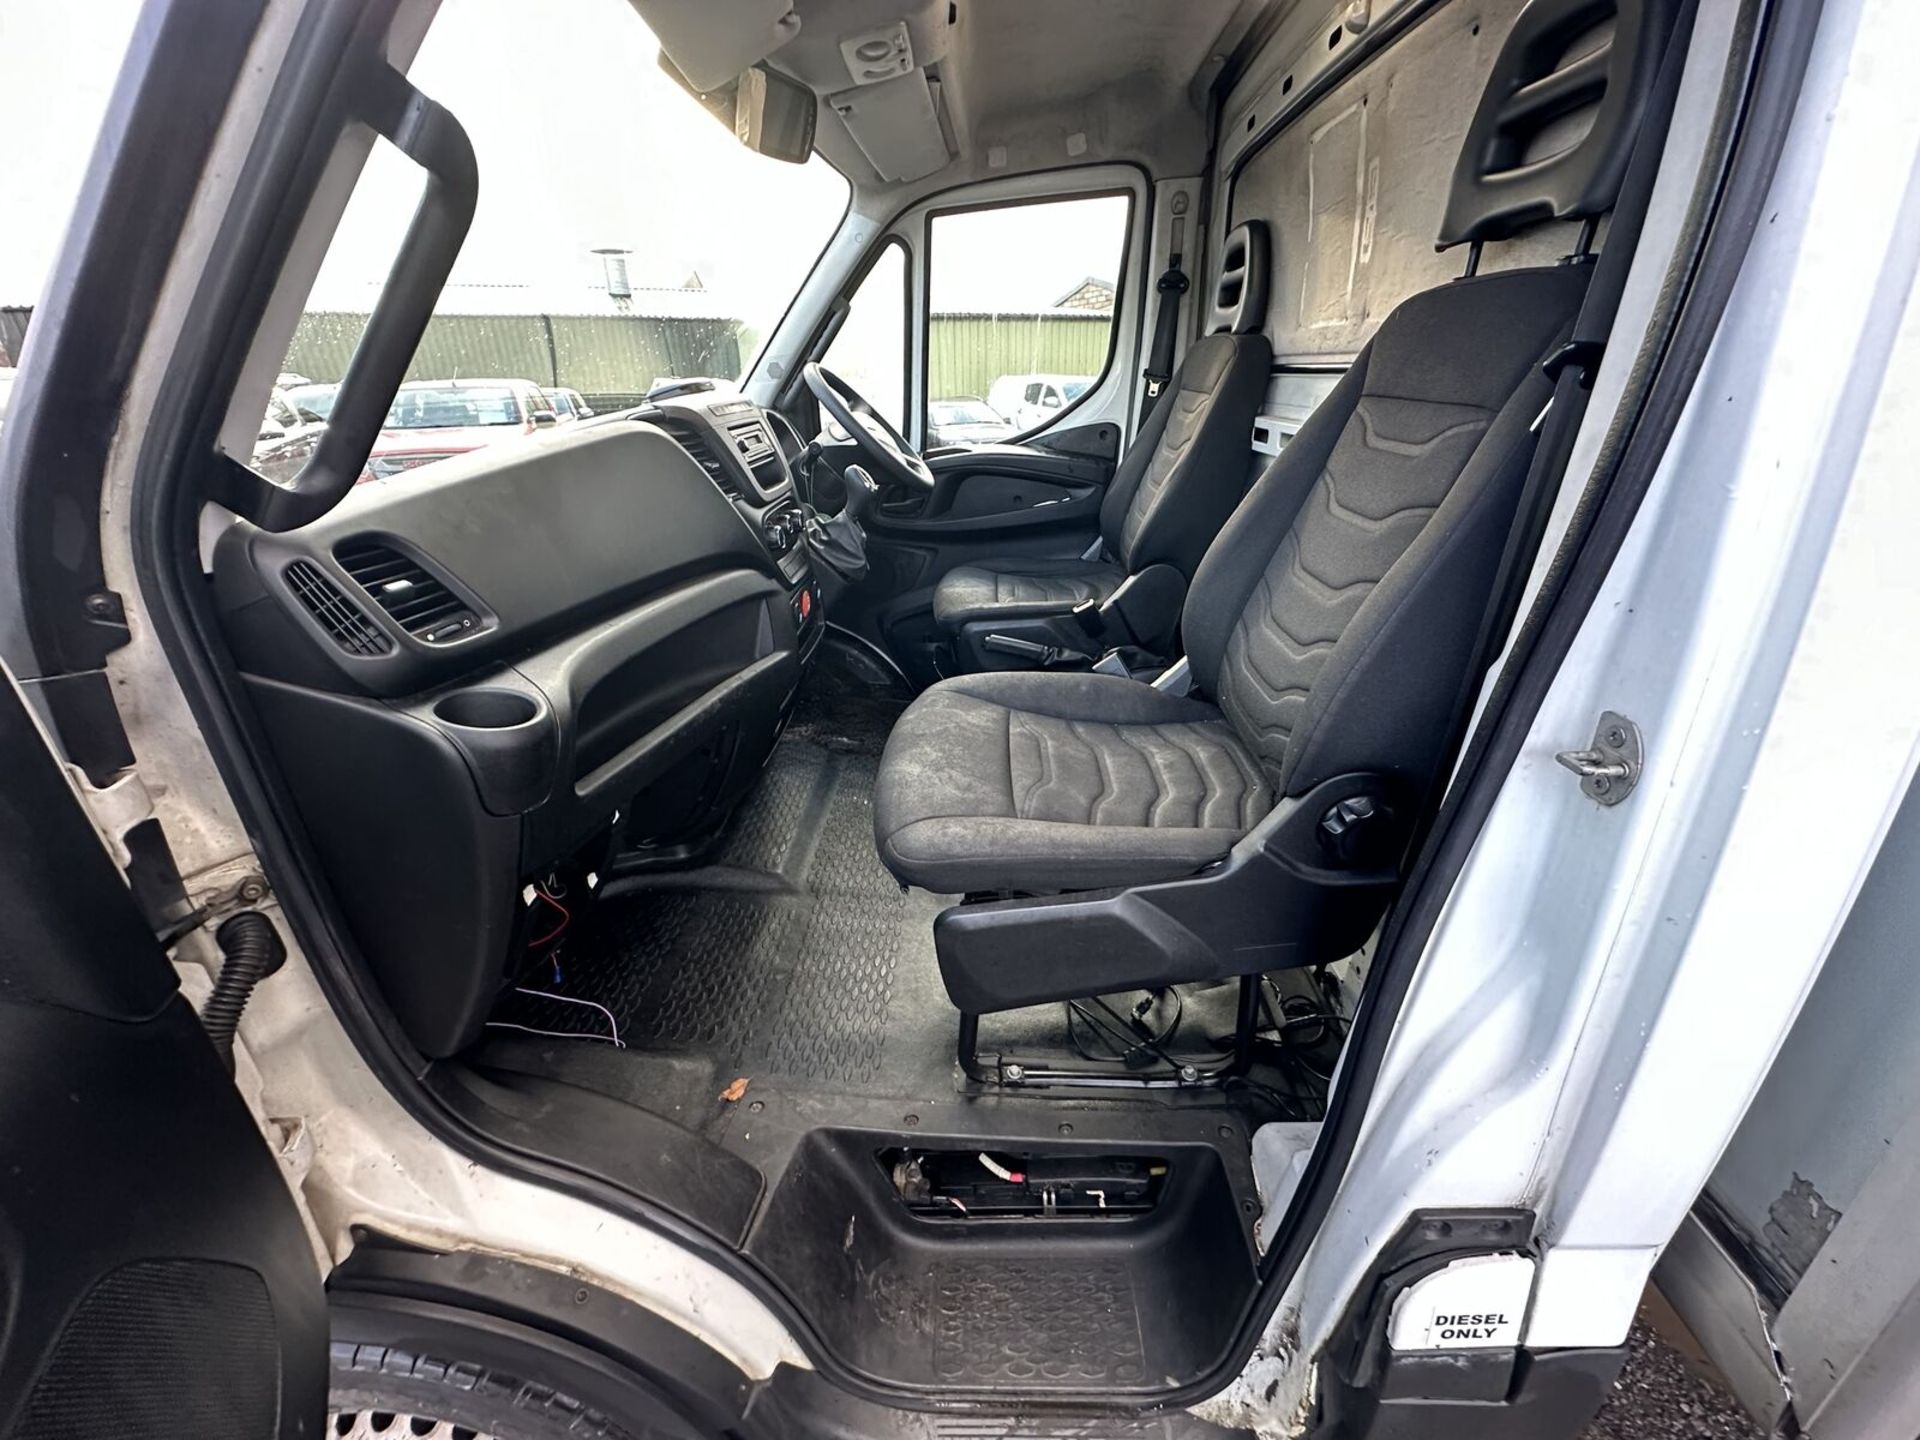 MECHANICAL NOTICE: 66 PLATE IVECO DAILY, GEARBOX WARNING - NO VAT ON HAMMER - Image 2 of 15